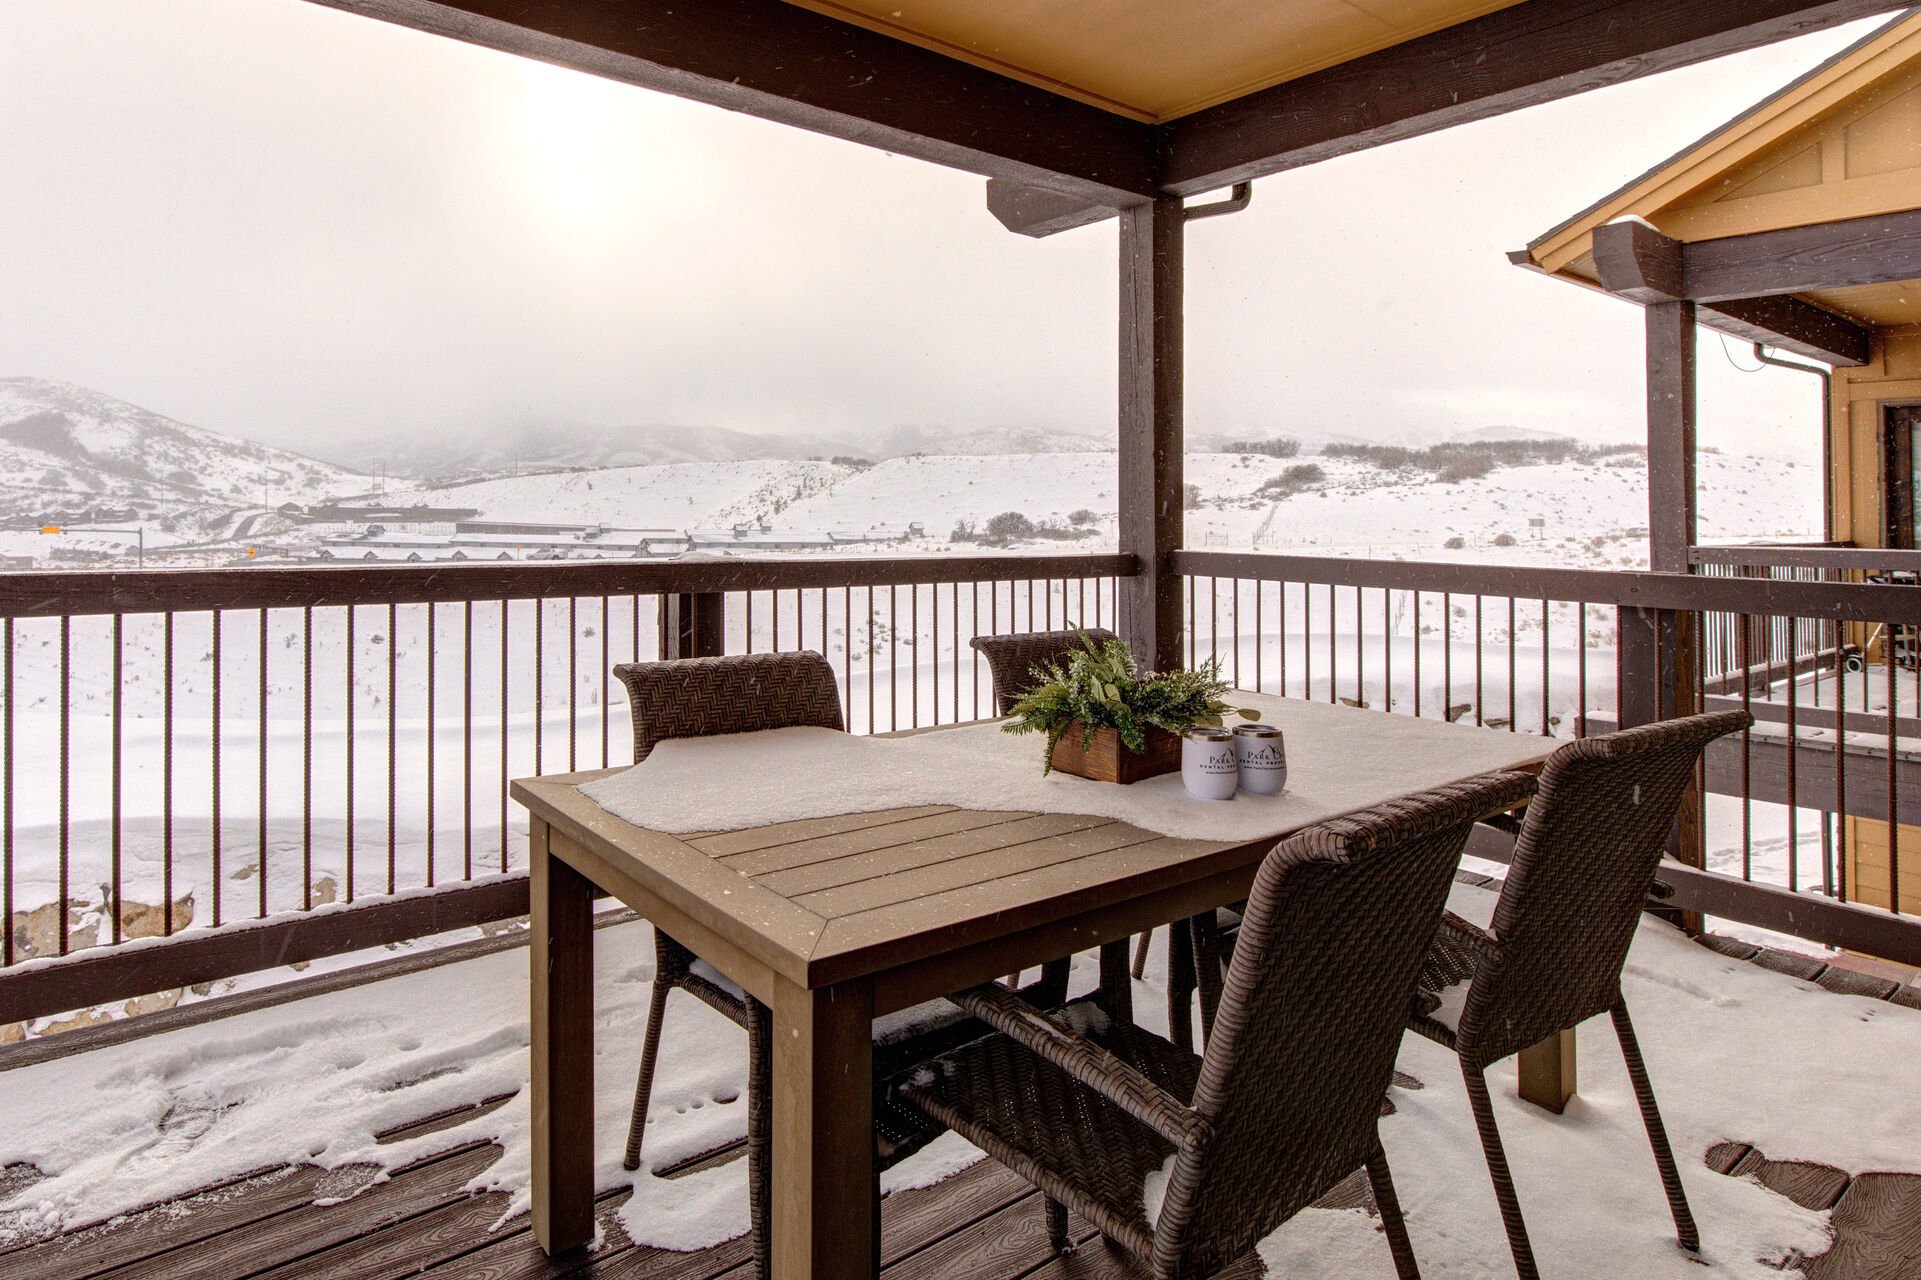 Covered Deck with Ski Resort Views on a Clear Day